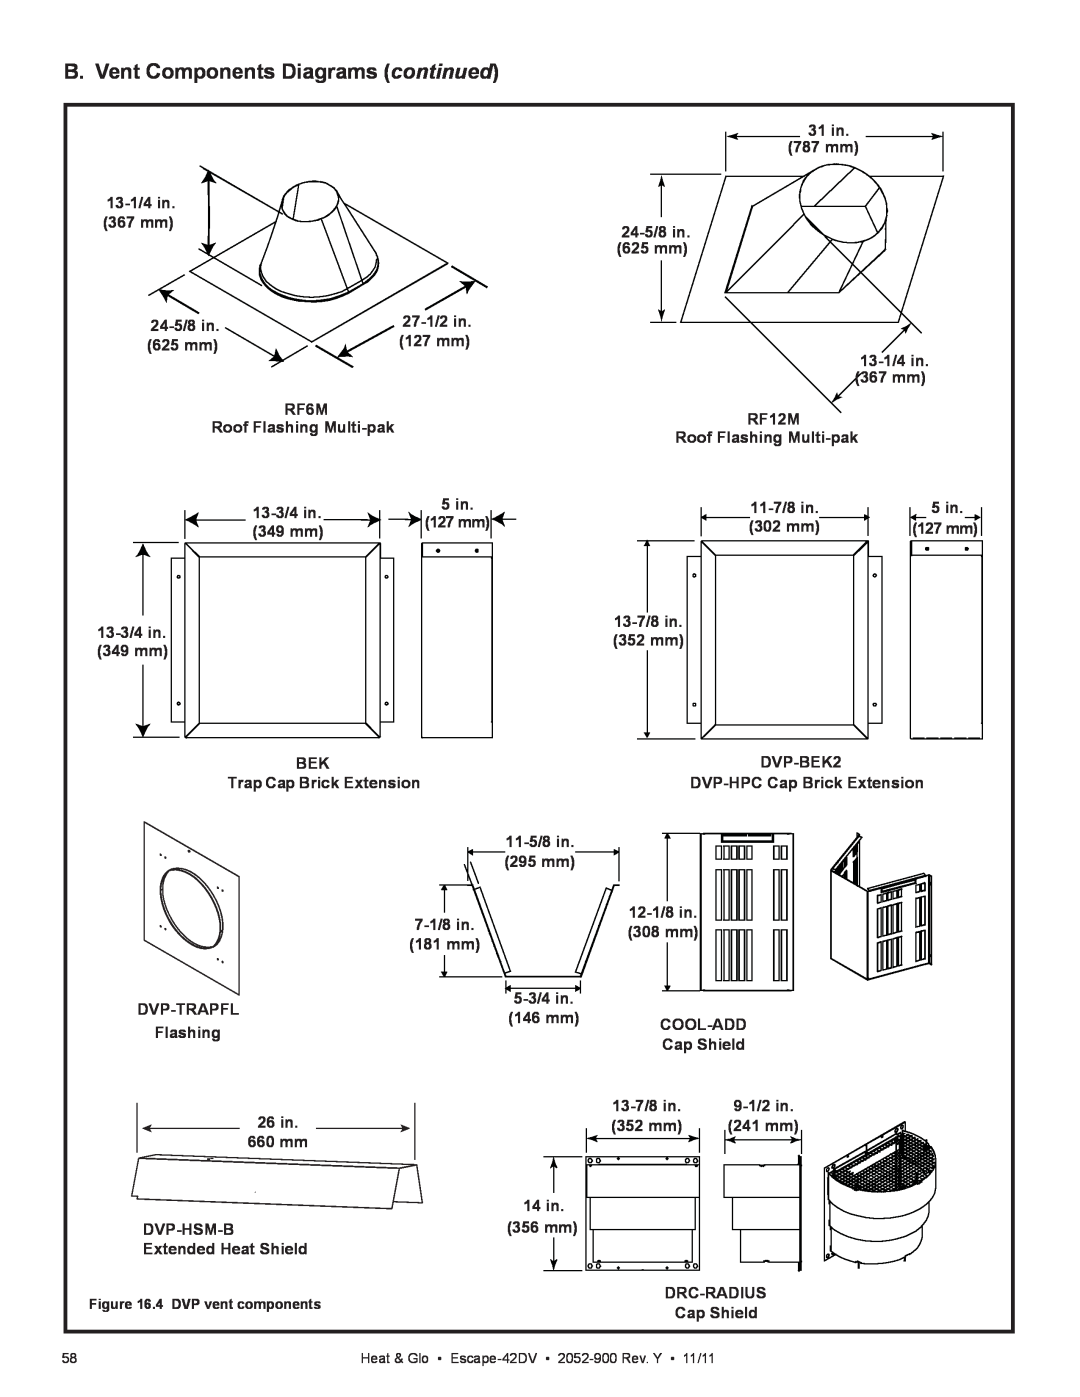 Heat & Glo LifeStyle Escape-42DV B. Vent Components Diagrams continued, 31 in, 787 mm, 13-1/4in, 367 mm, 24-5/8in, 625 mm 